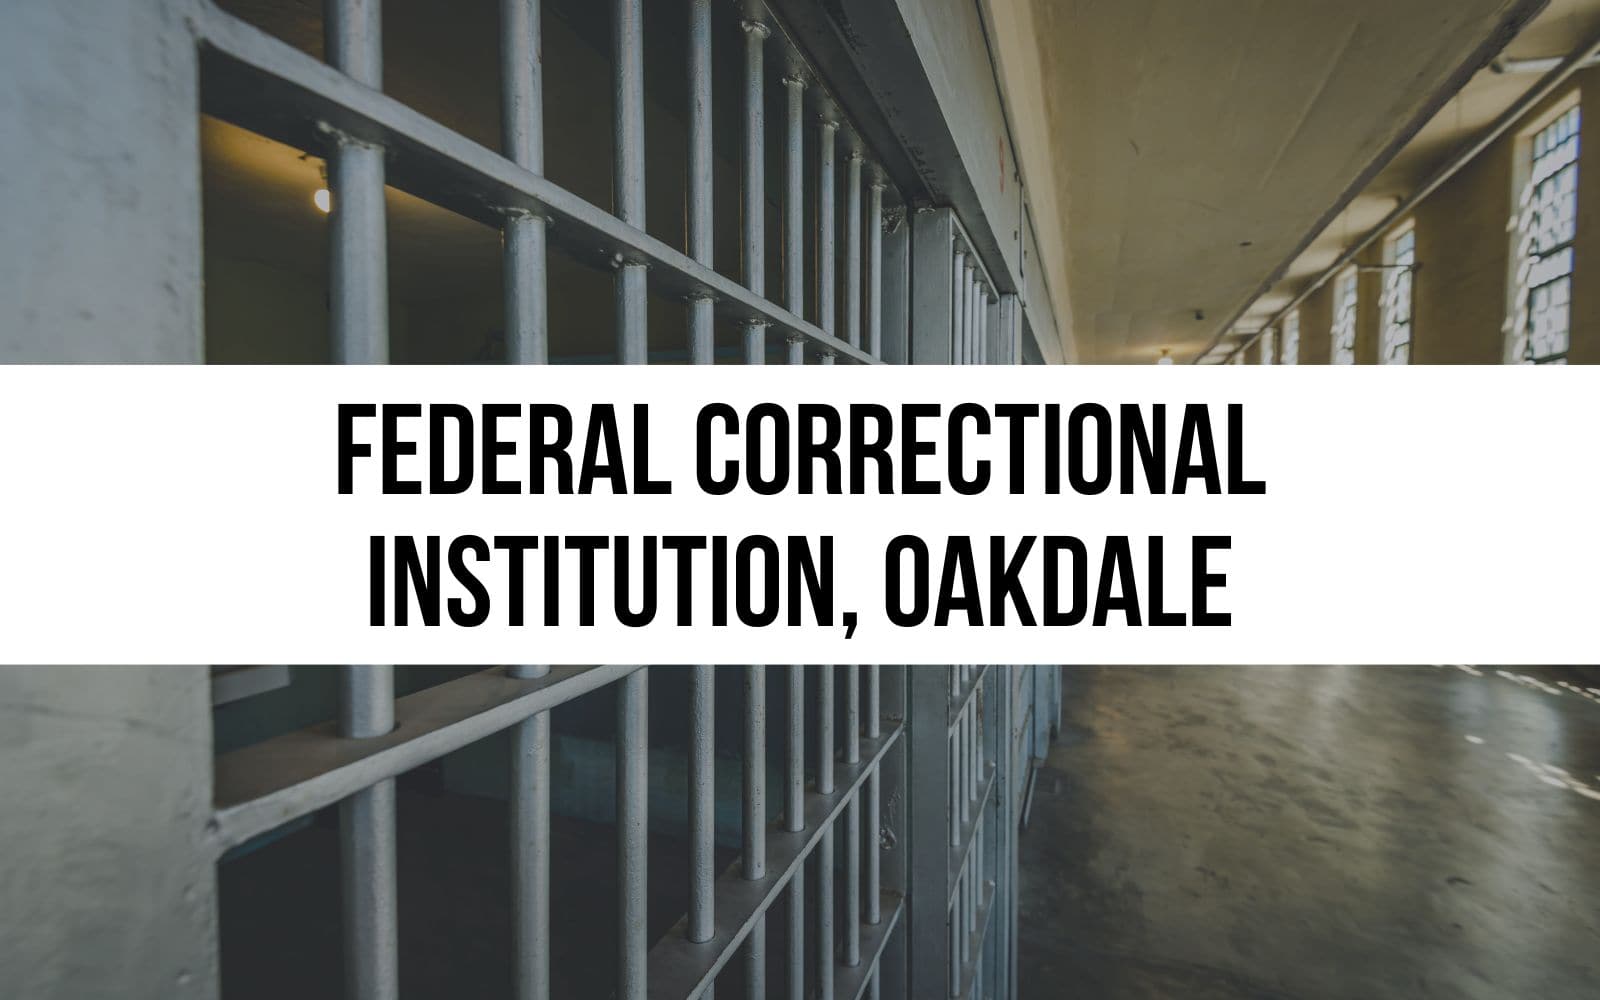 Federal Correctional Institution, Oakdale